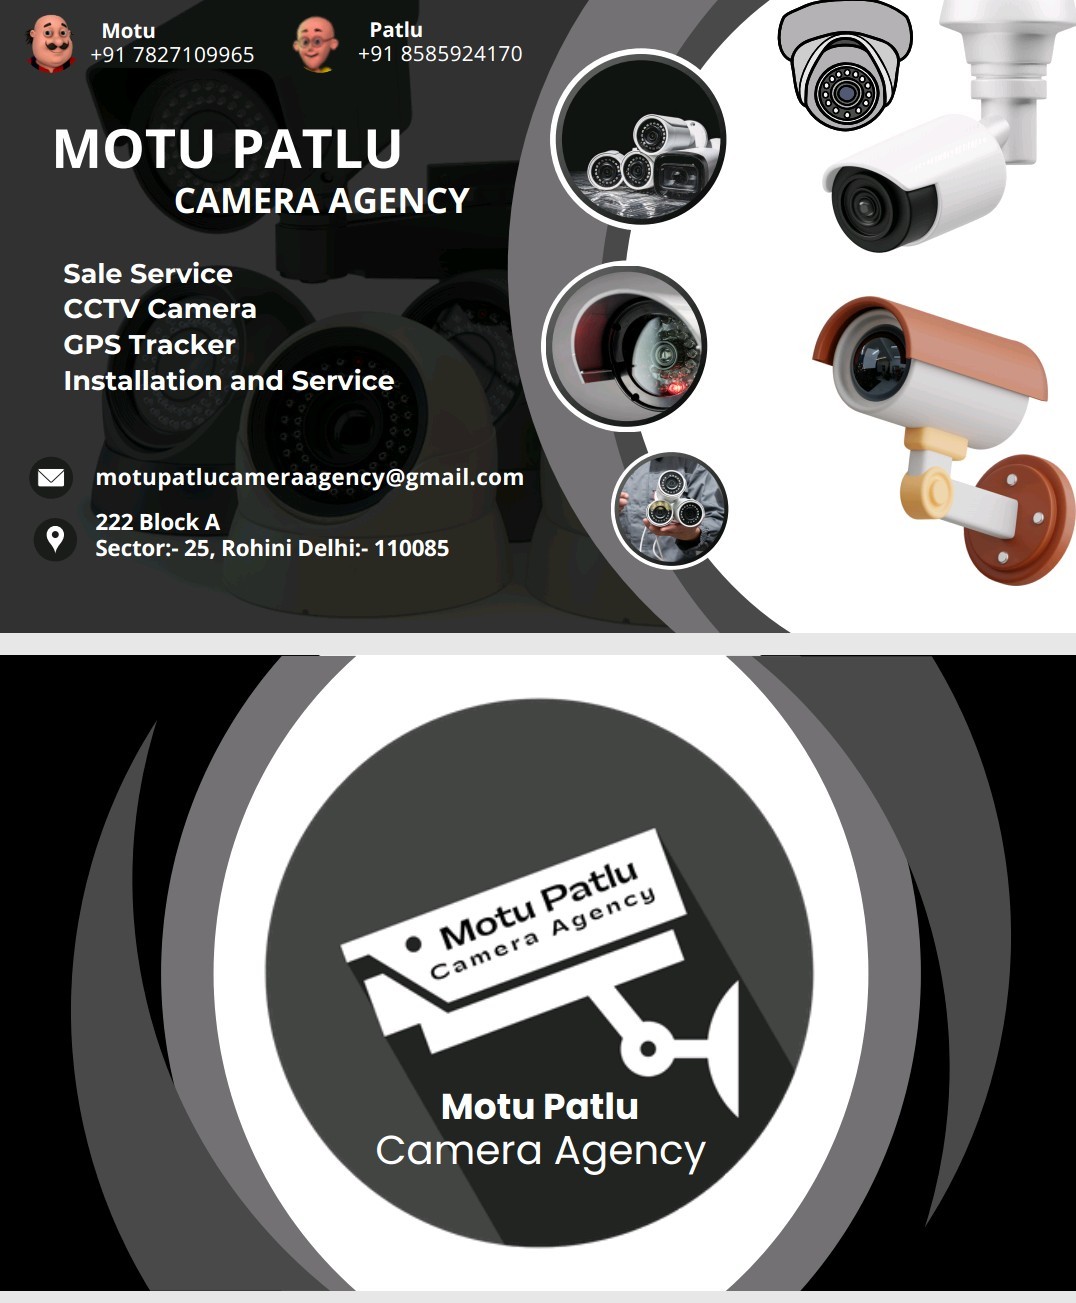 CCTV Installation/ Repair; Exp: Some experience (0-1 years)